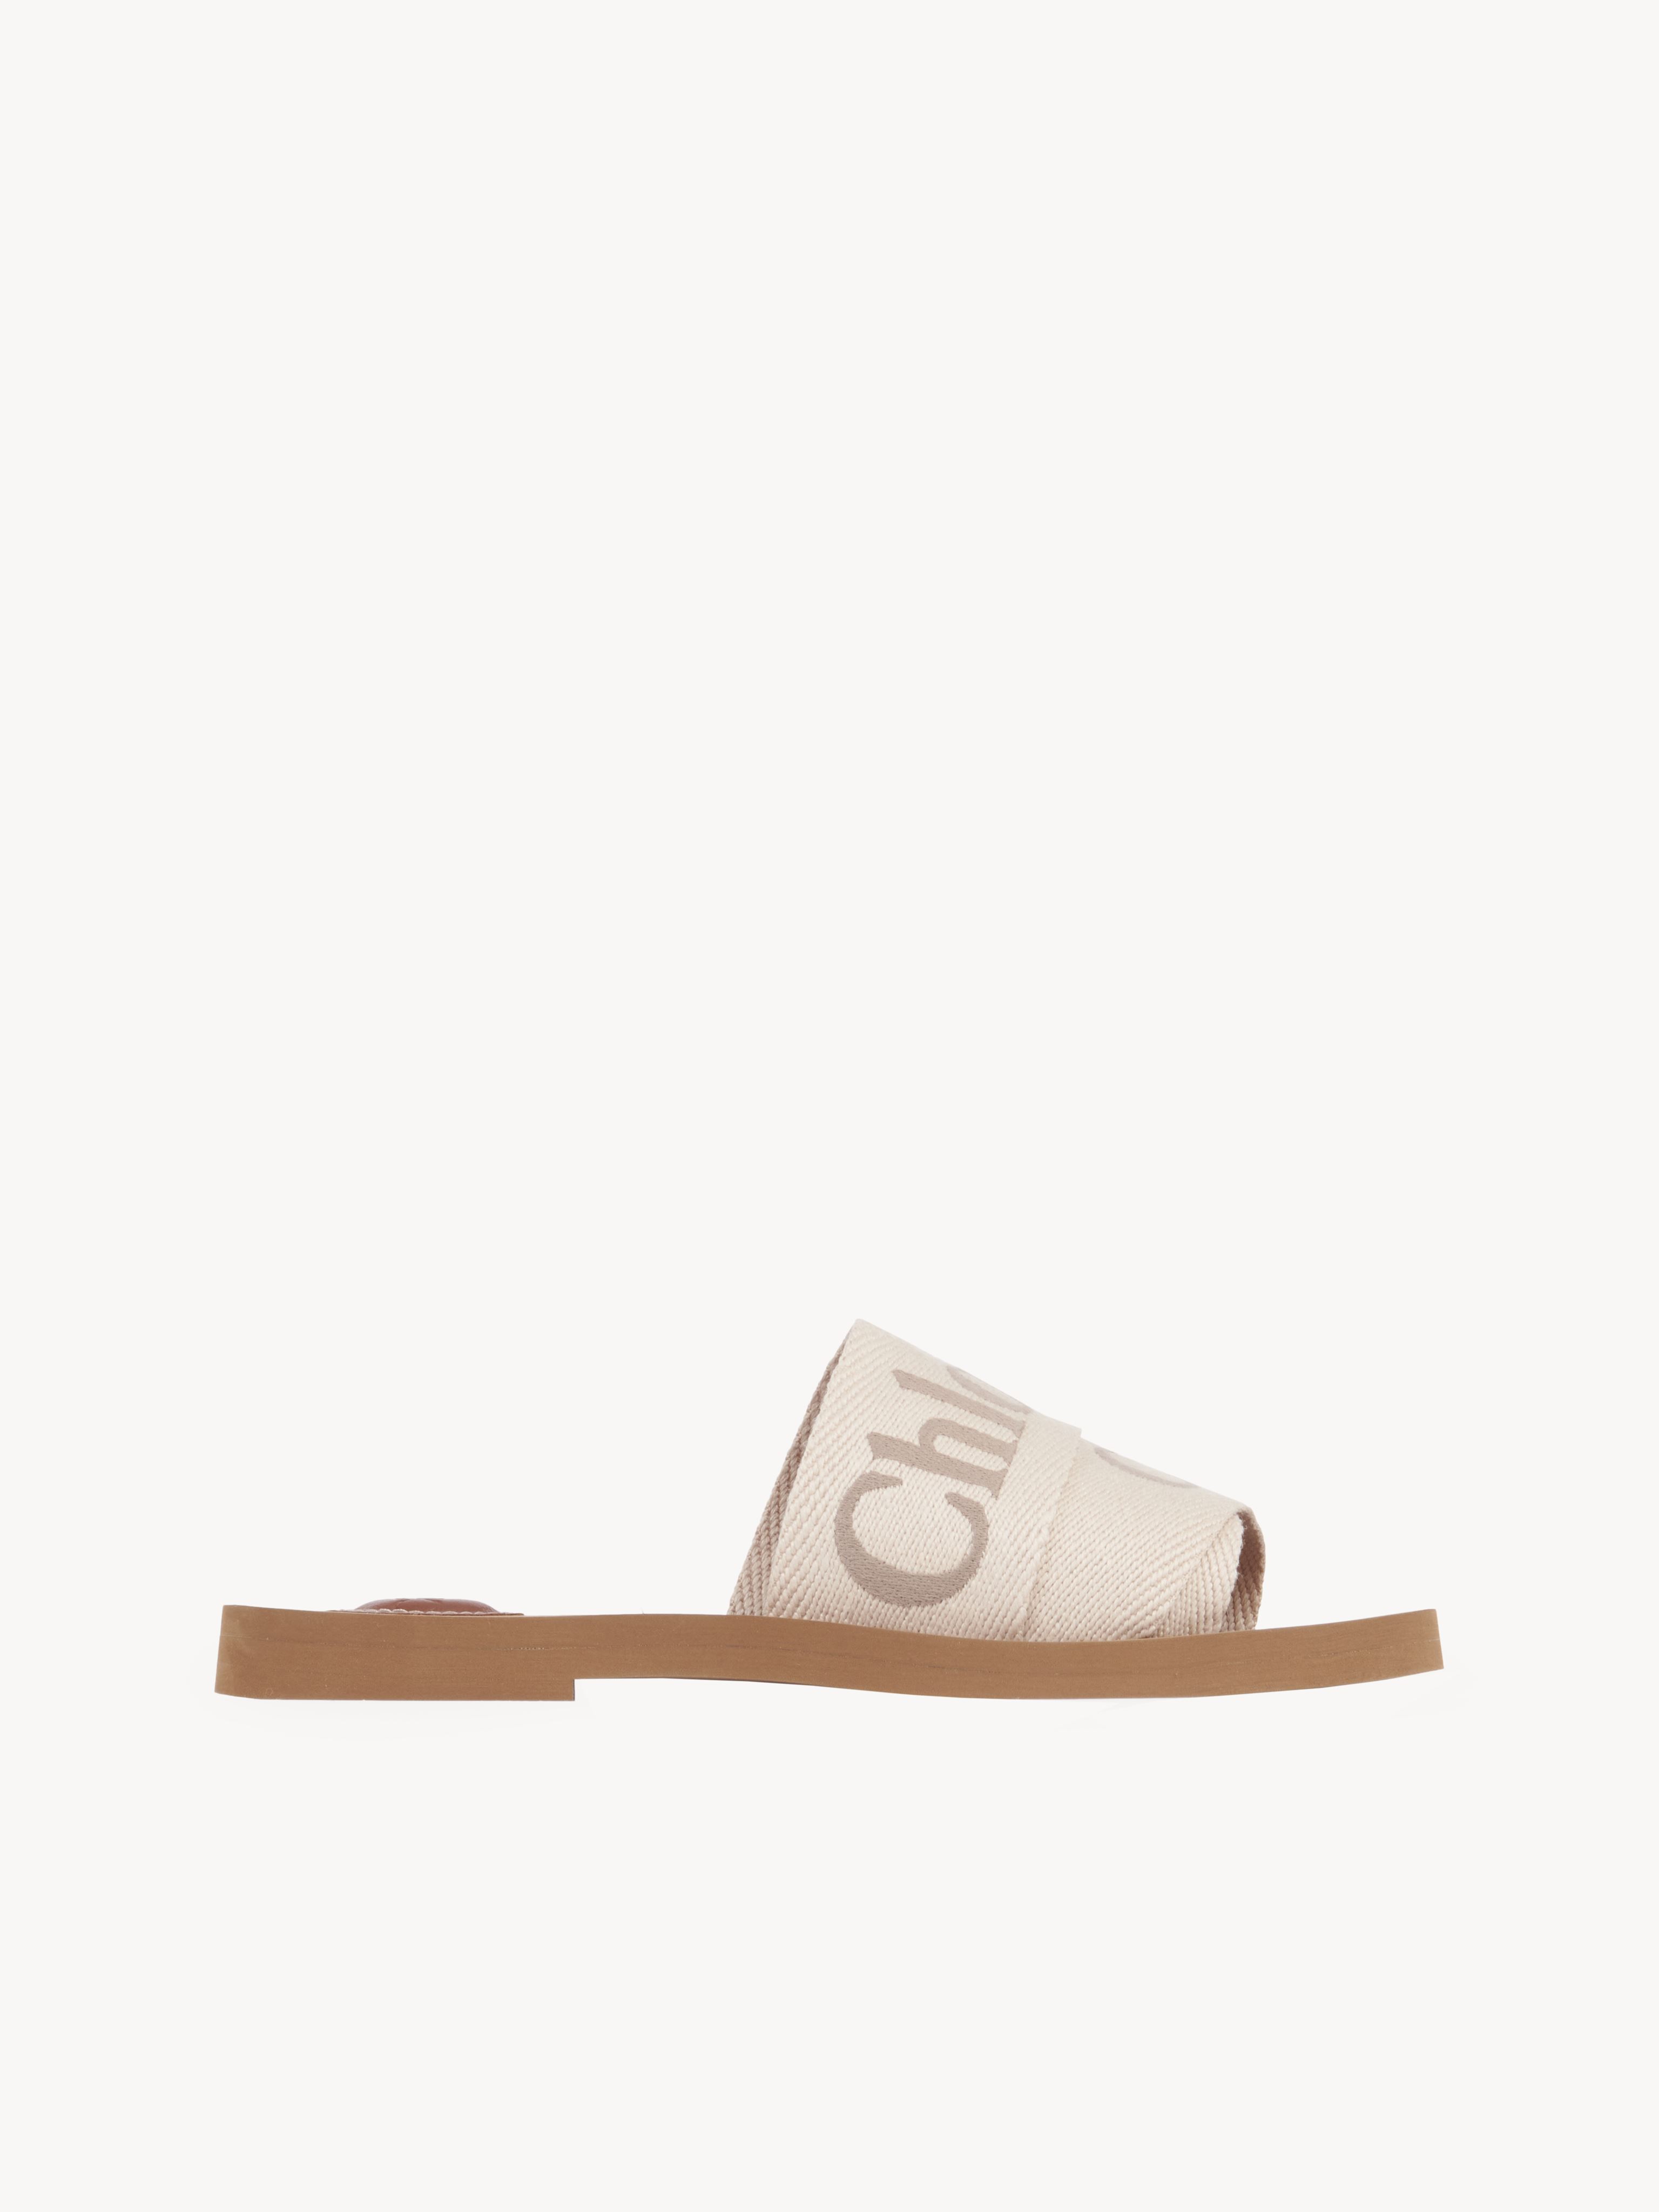 Chloé Mules Plates Woody Femme Beige Taille 34 90% Lin, 10% Polyester